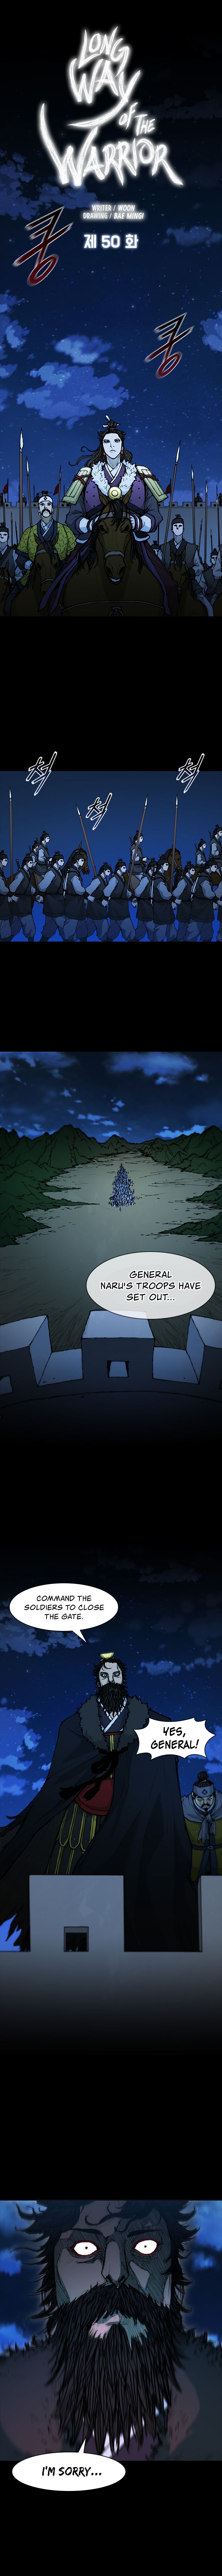 Long Way of the Warrior - Chapter 50 Page 9